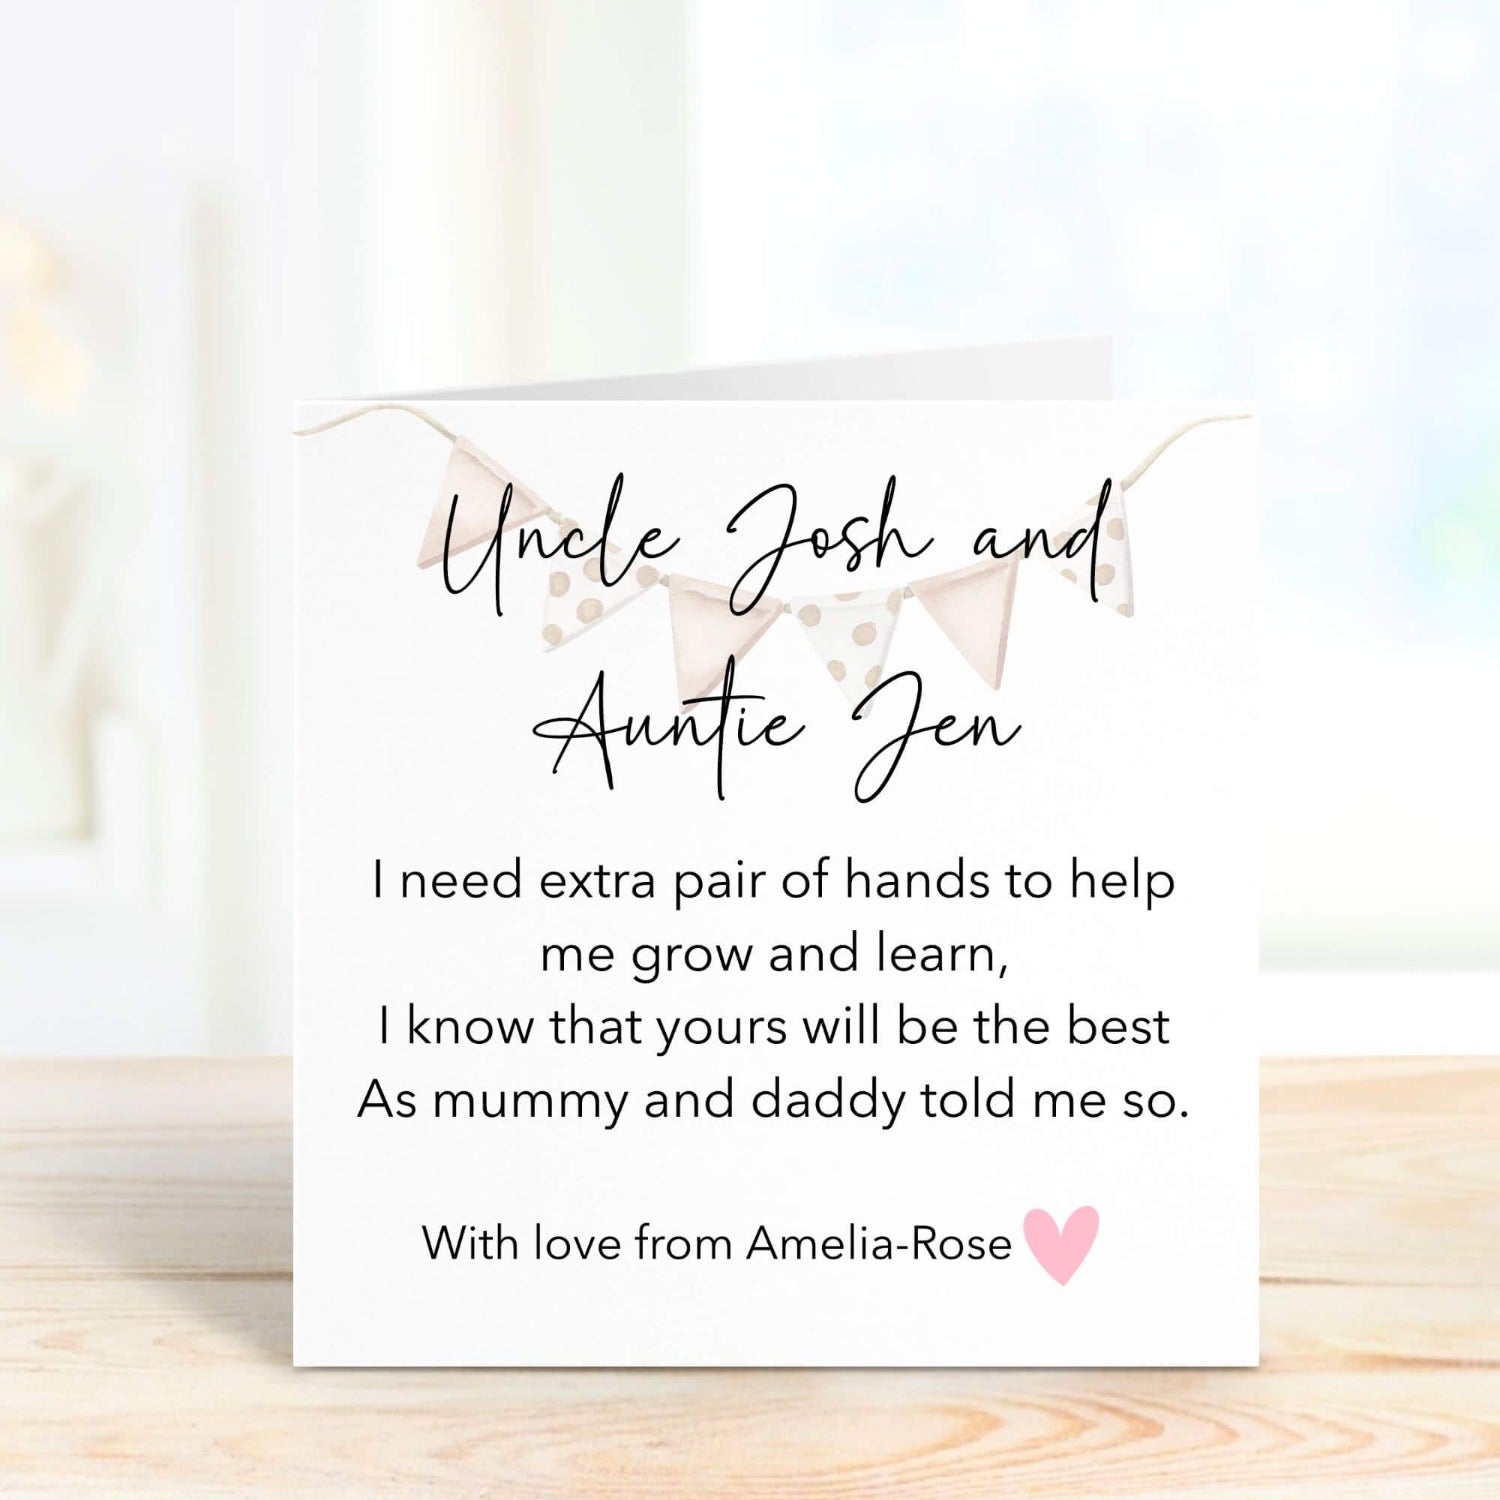 Christening card for godparents proposal